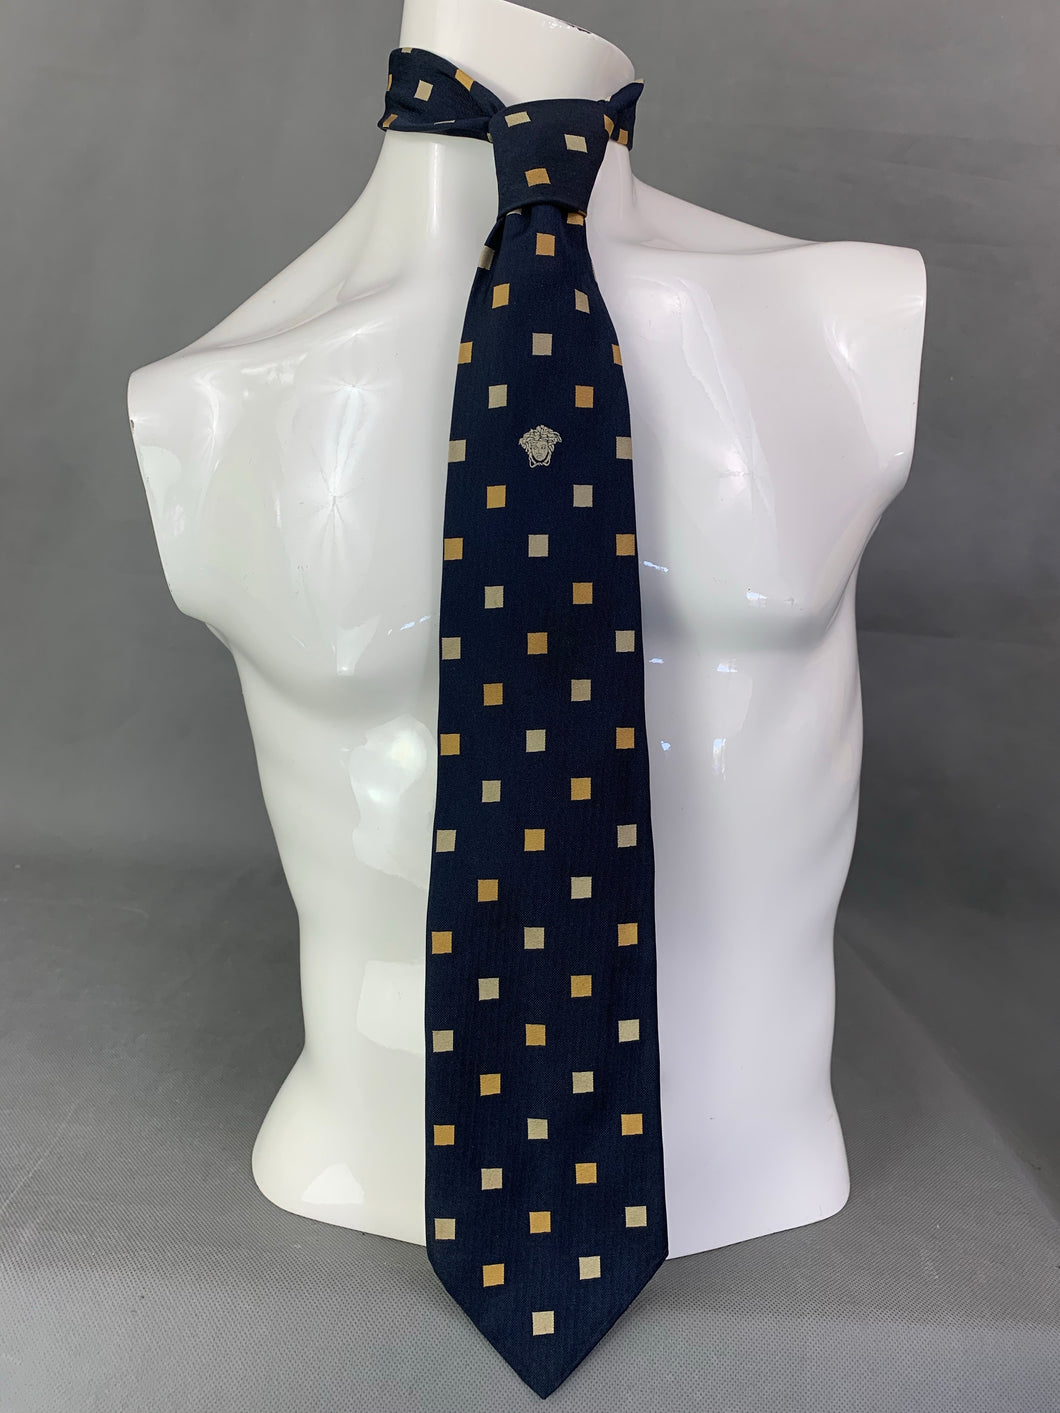 GIANNI VERSACE Mens 100% Silk TIE - Made in Italy